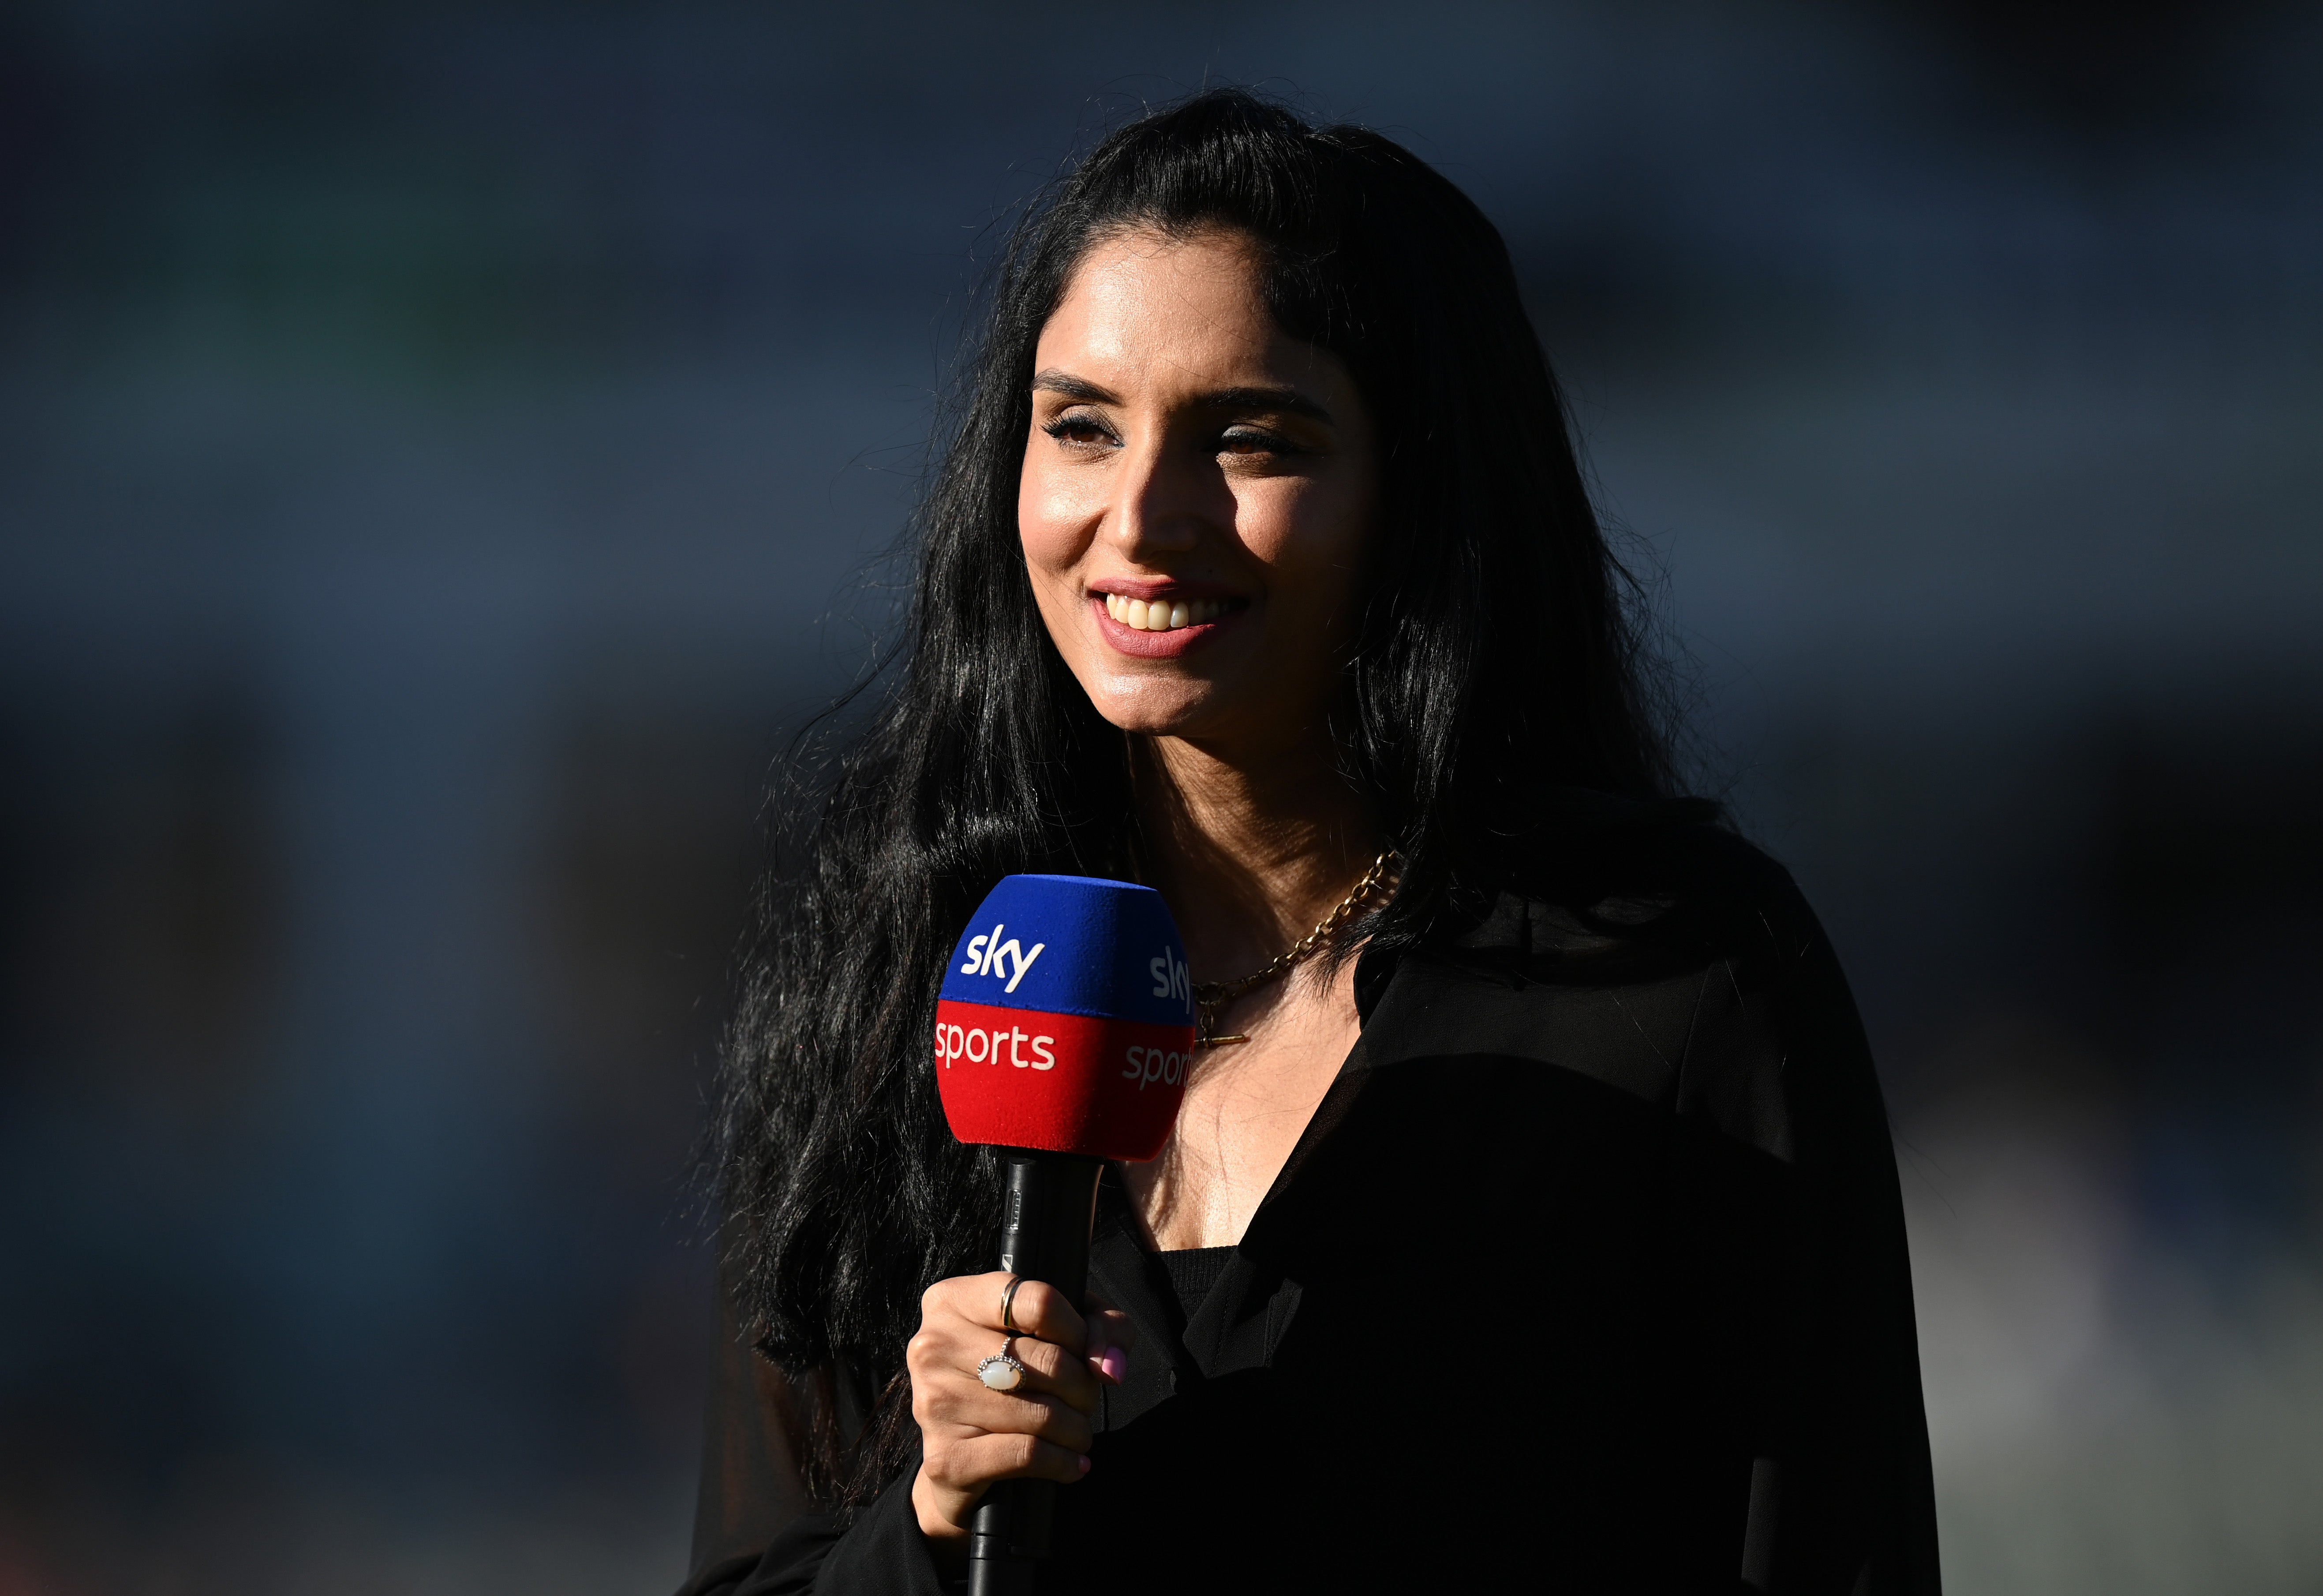 File photo: Zainab Abbas during the The Hundred match between Birmingham Phoenix Men and Southern Brave Men at Edgbaston in Birmingham on 10 August 2022